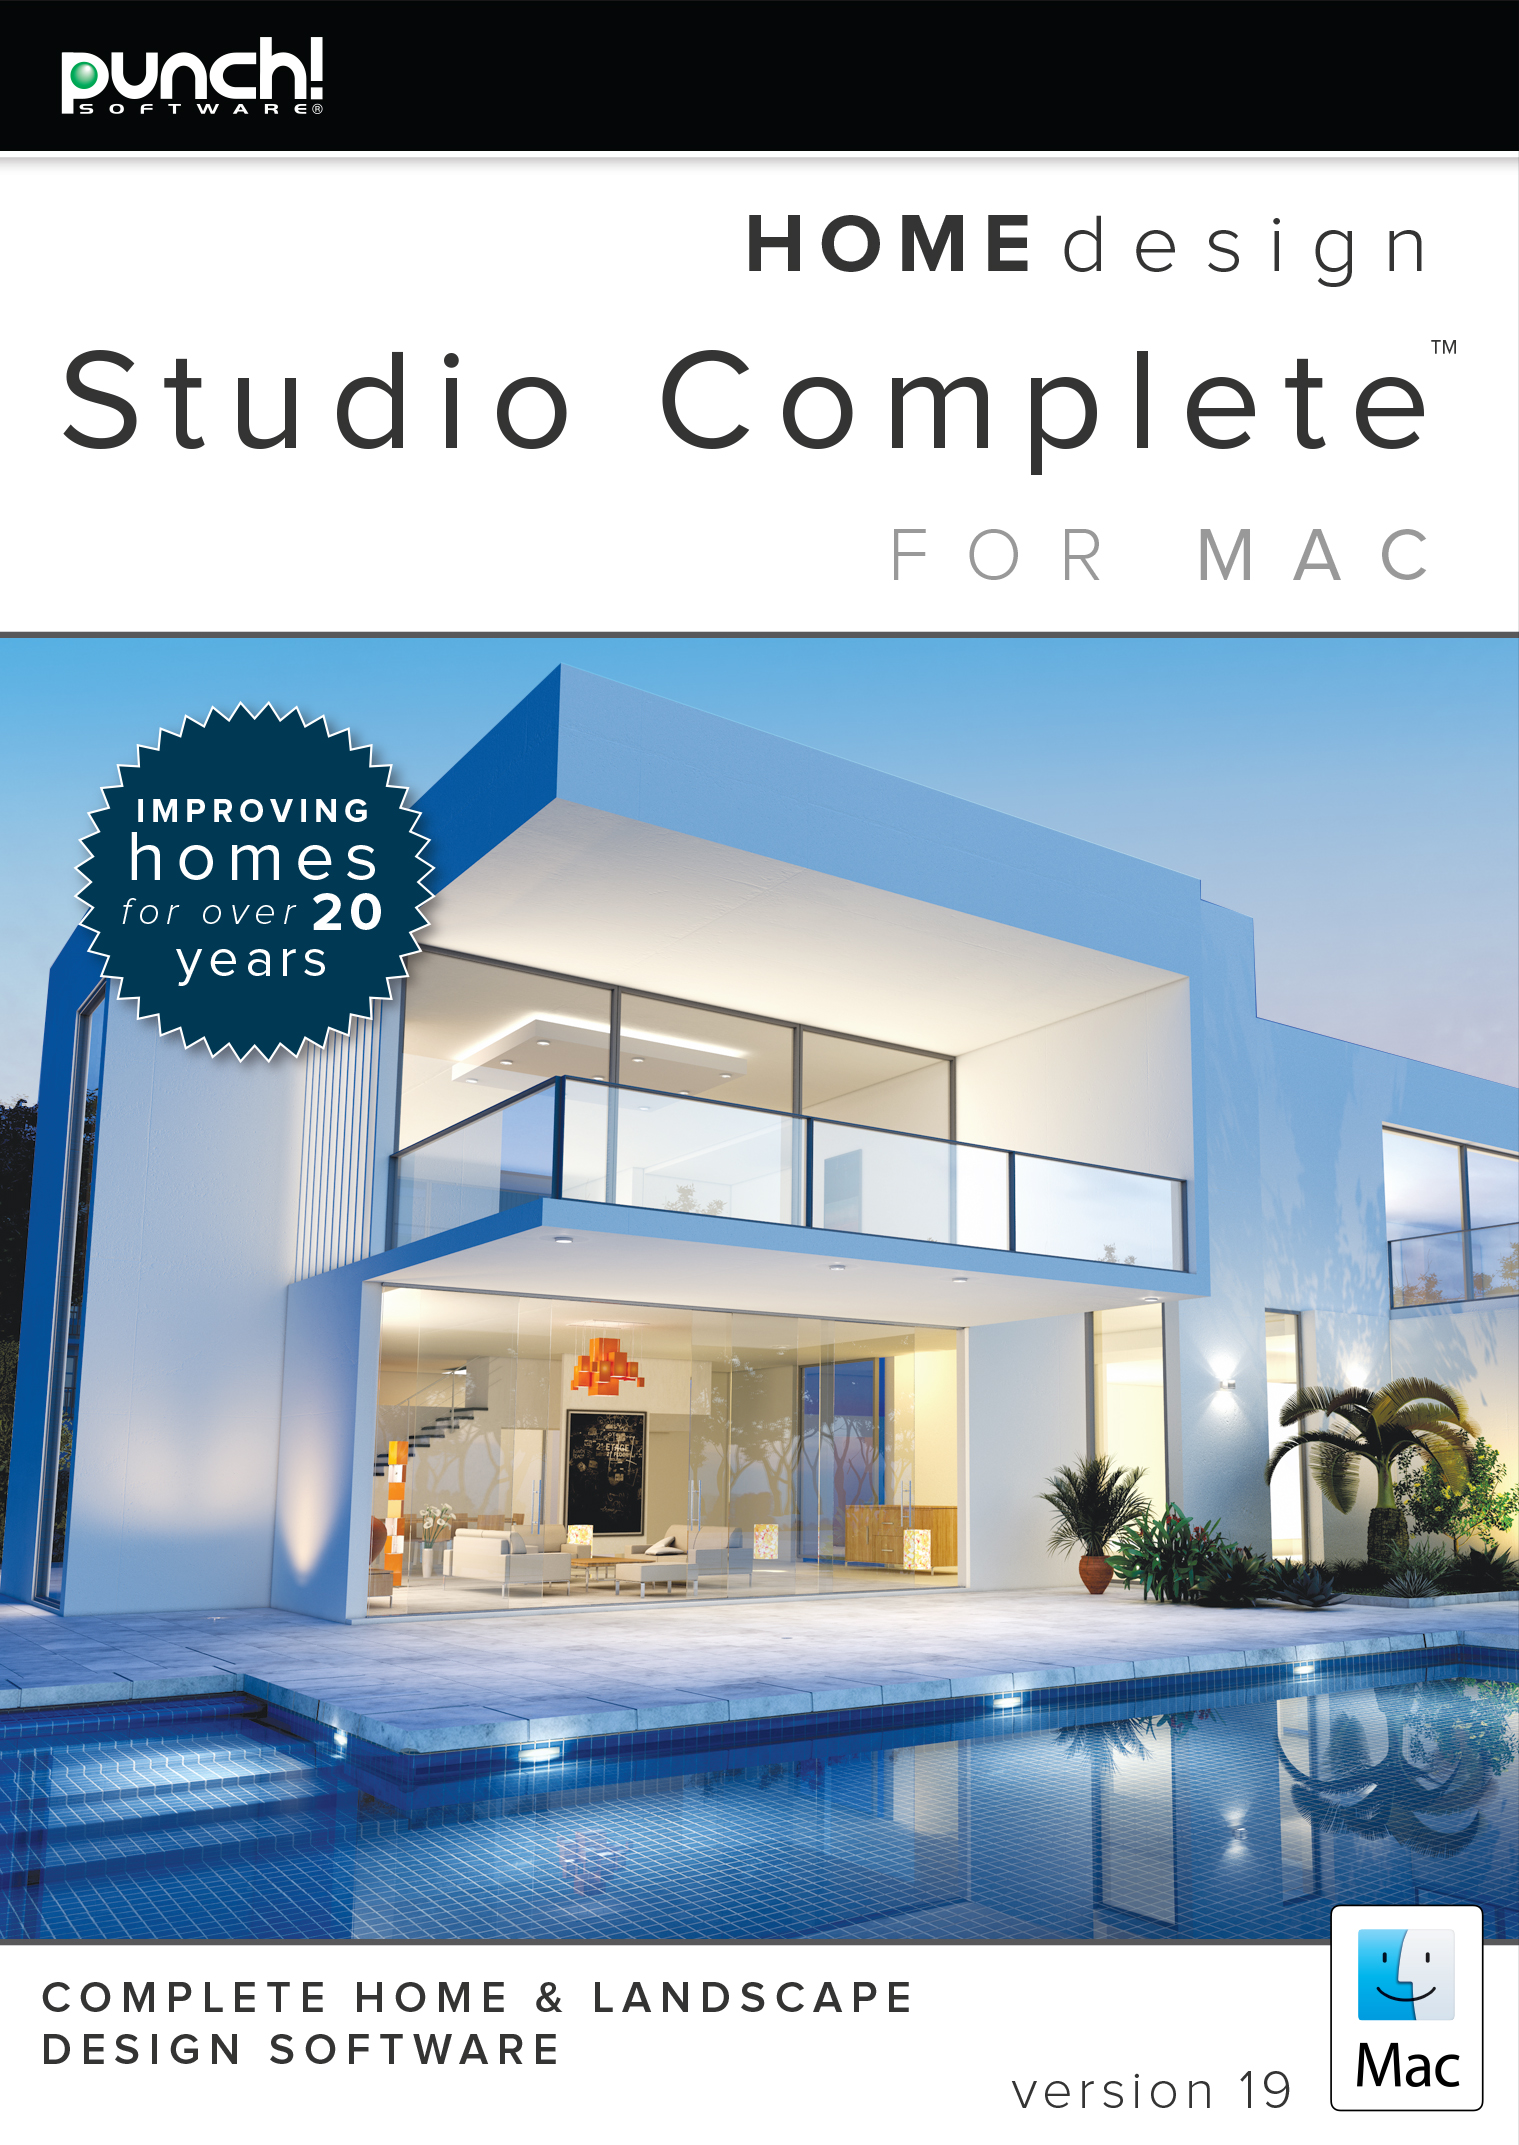 Free punch home design software